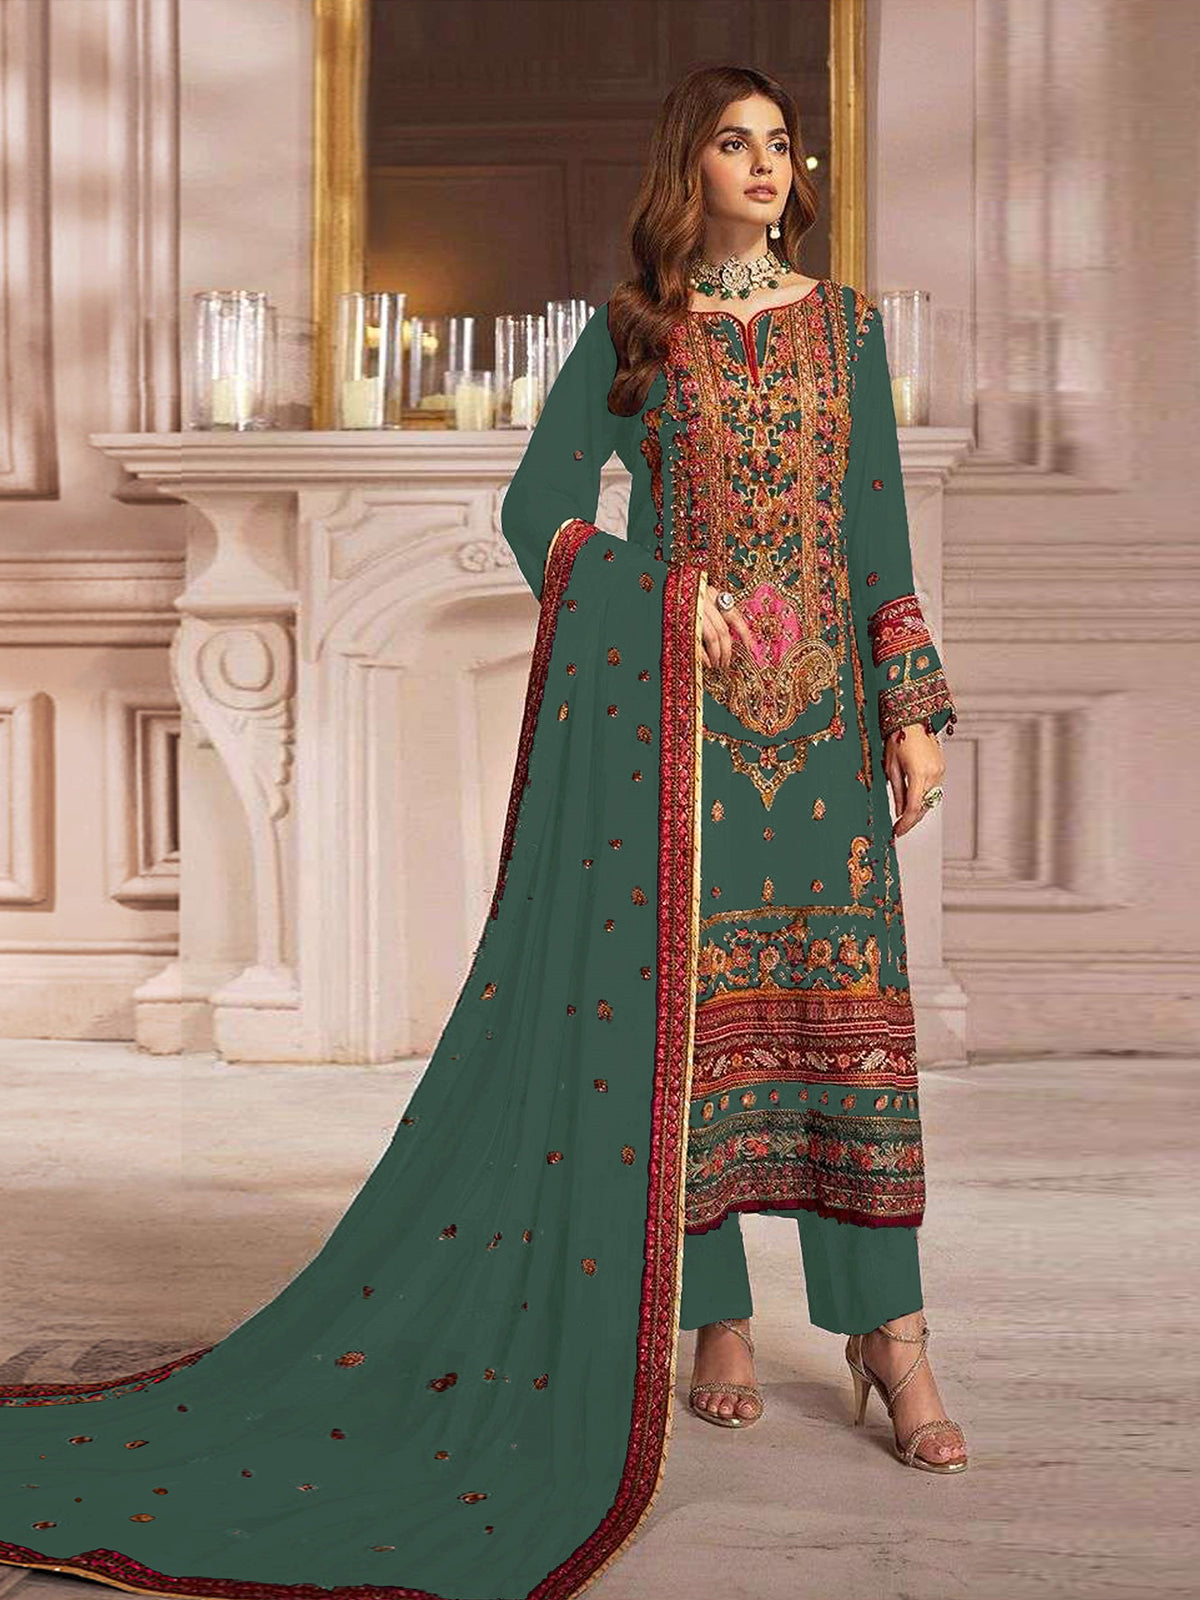 Odette Green Georgette Embroidered Semi Stitched Salwar Suit For Women